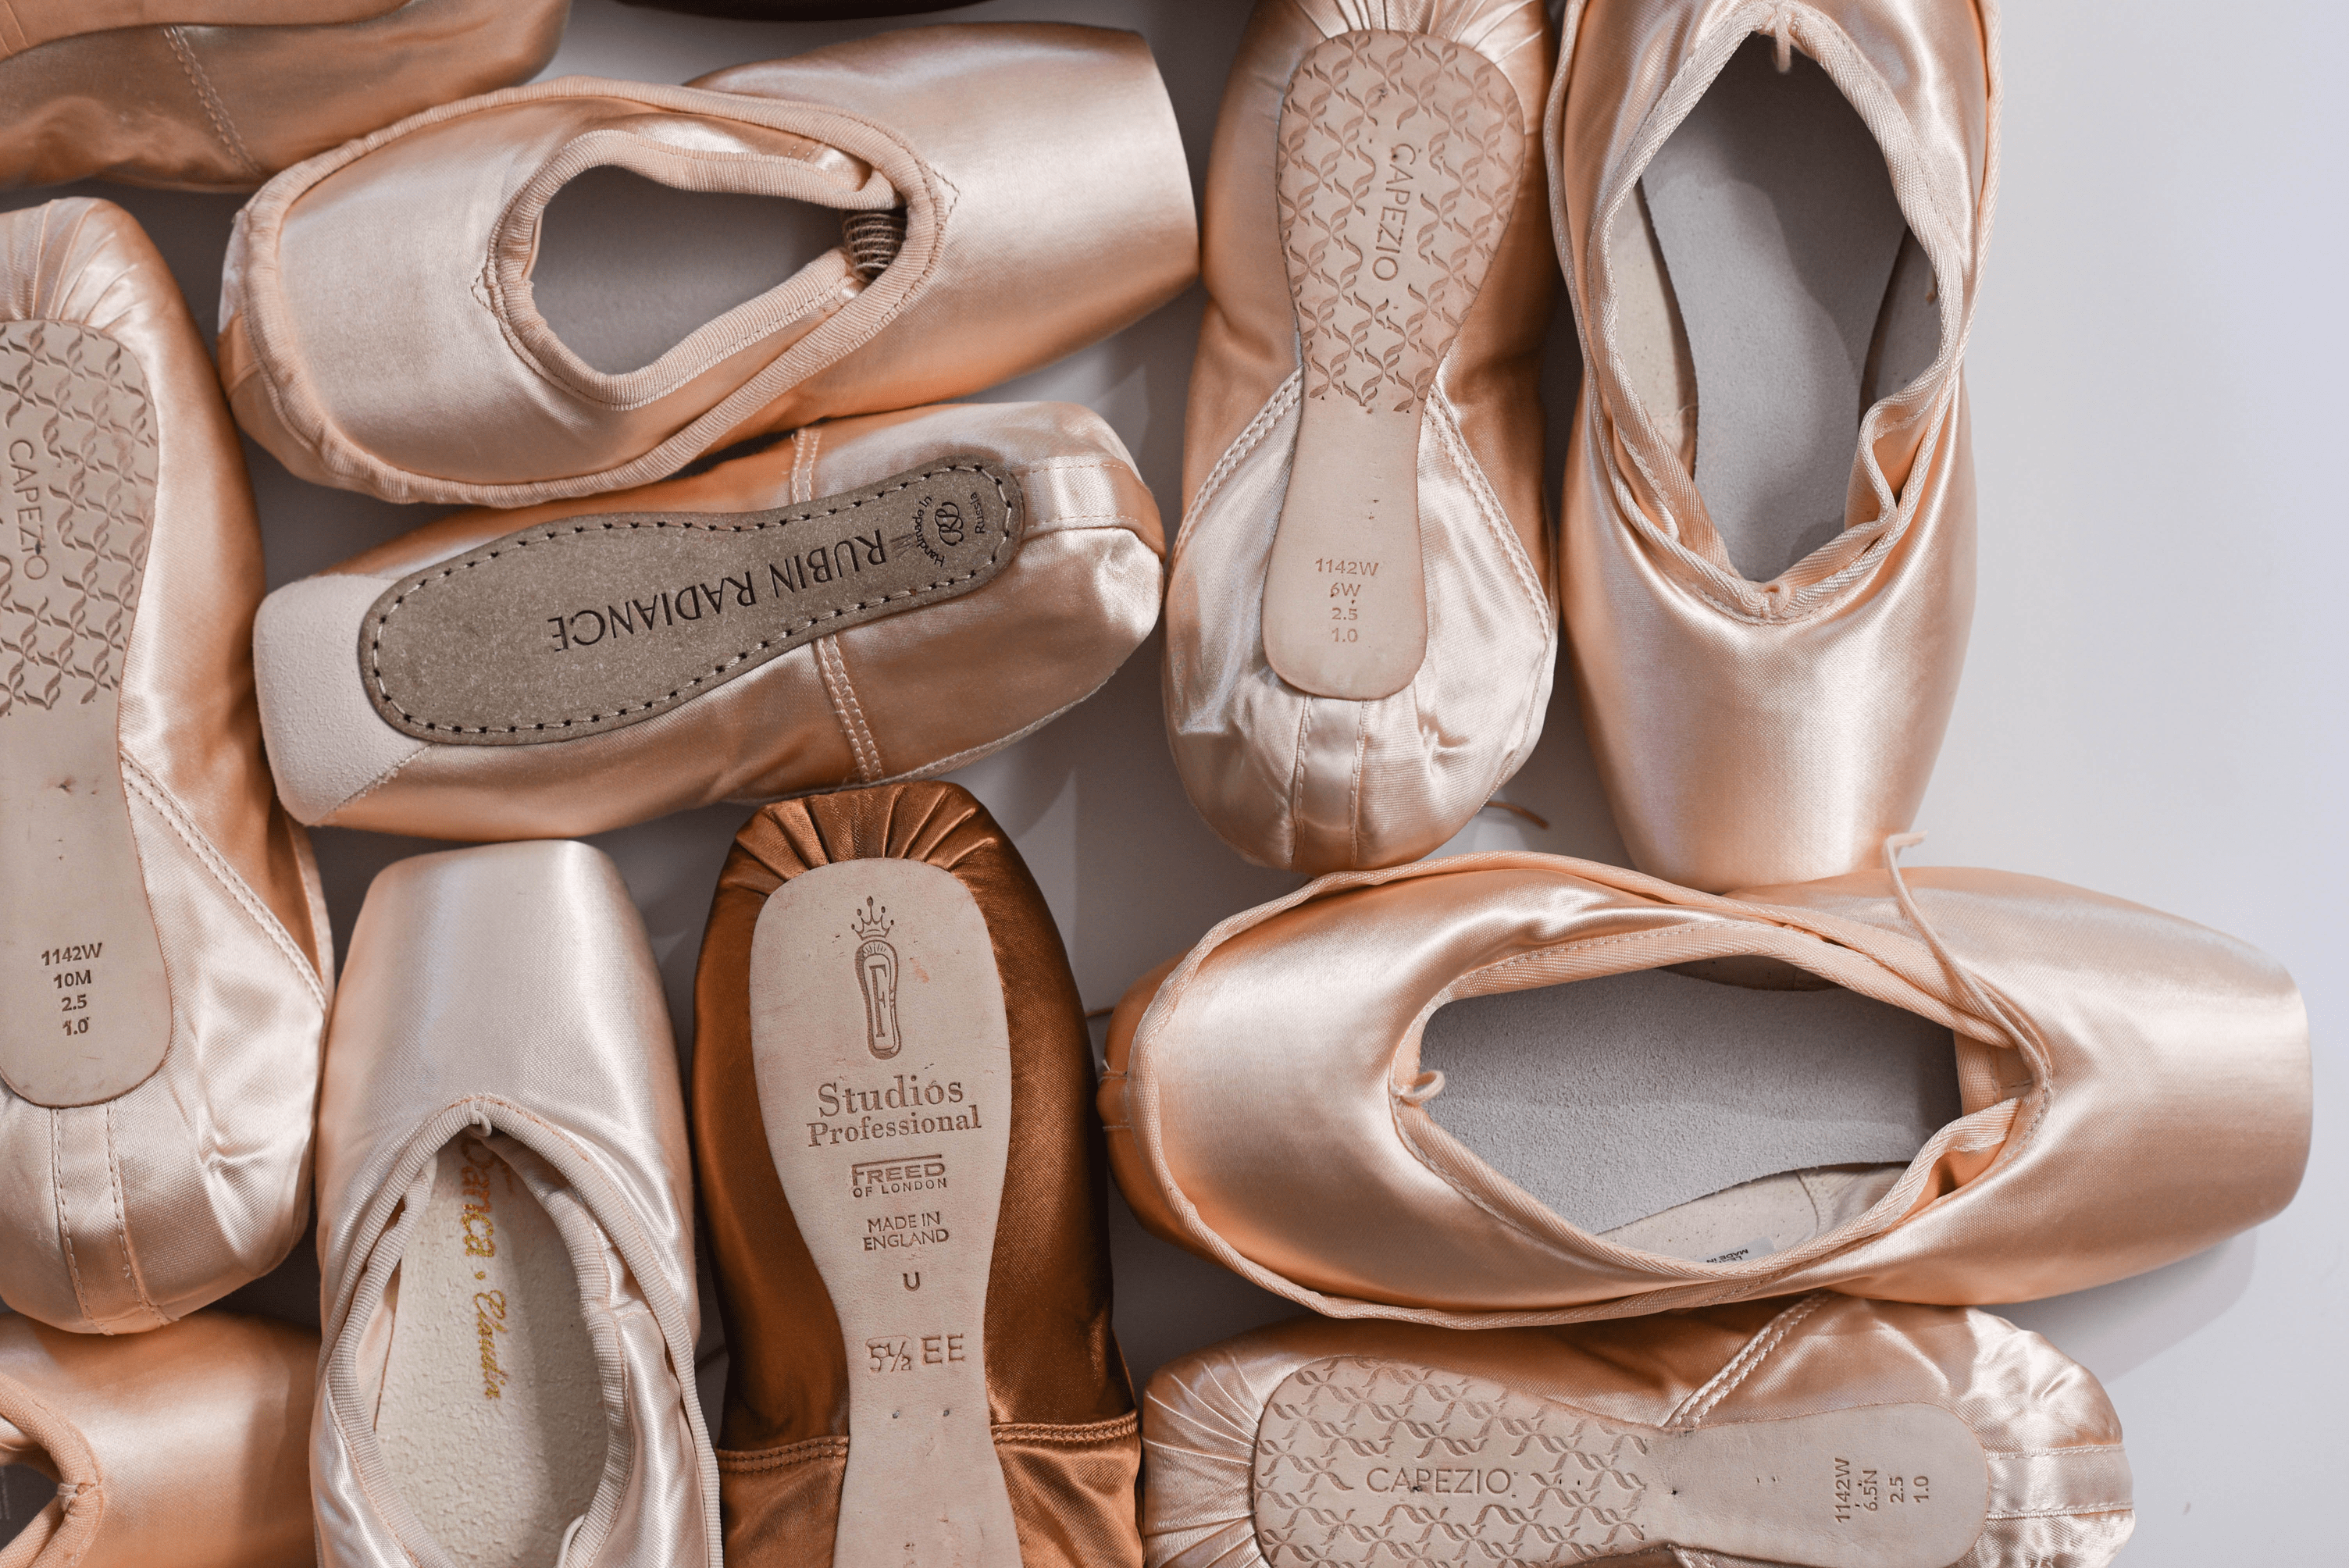 How To Extend The Life Of Your Pointe Shoes – The Shoe Room